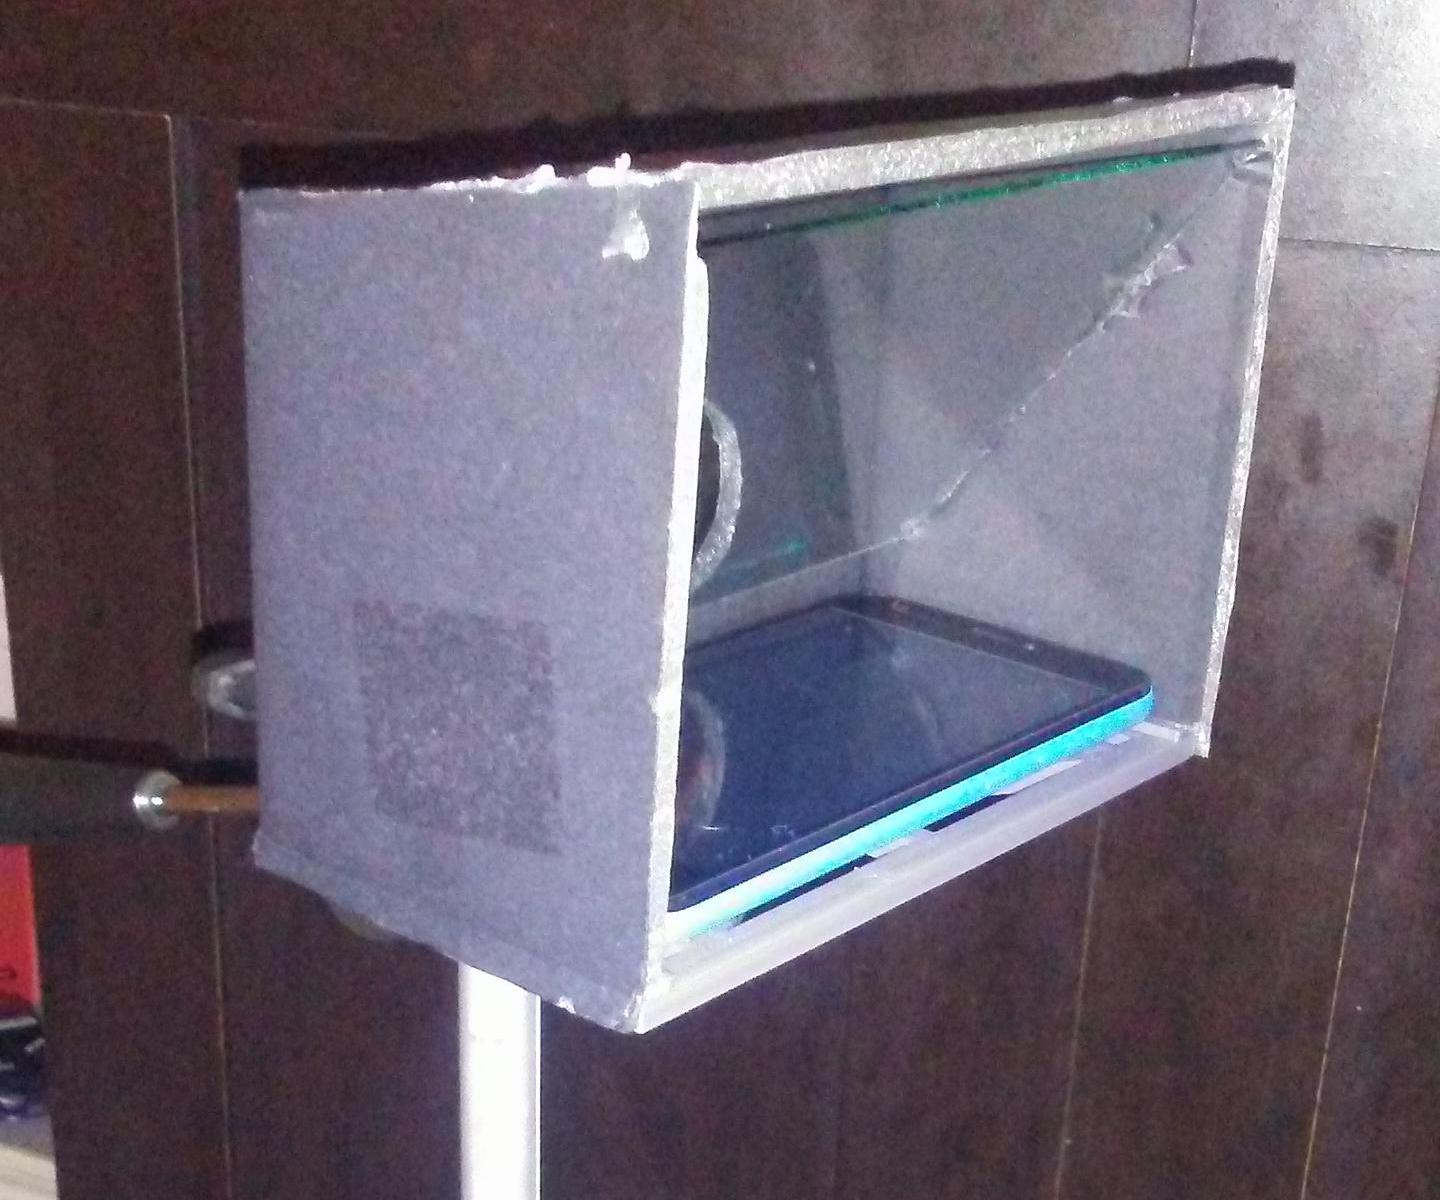 Cheap and Easy Cell Phone Teleprompter - 3D Print and Foamboard